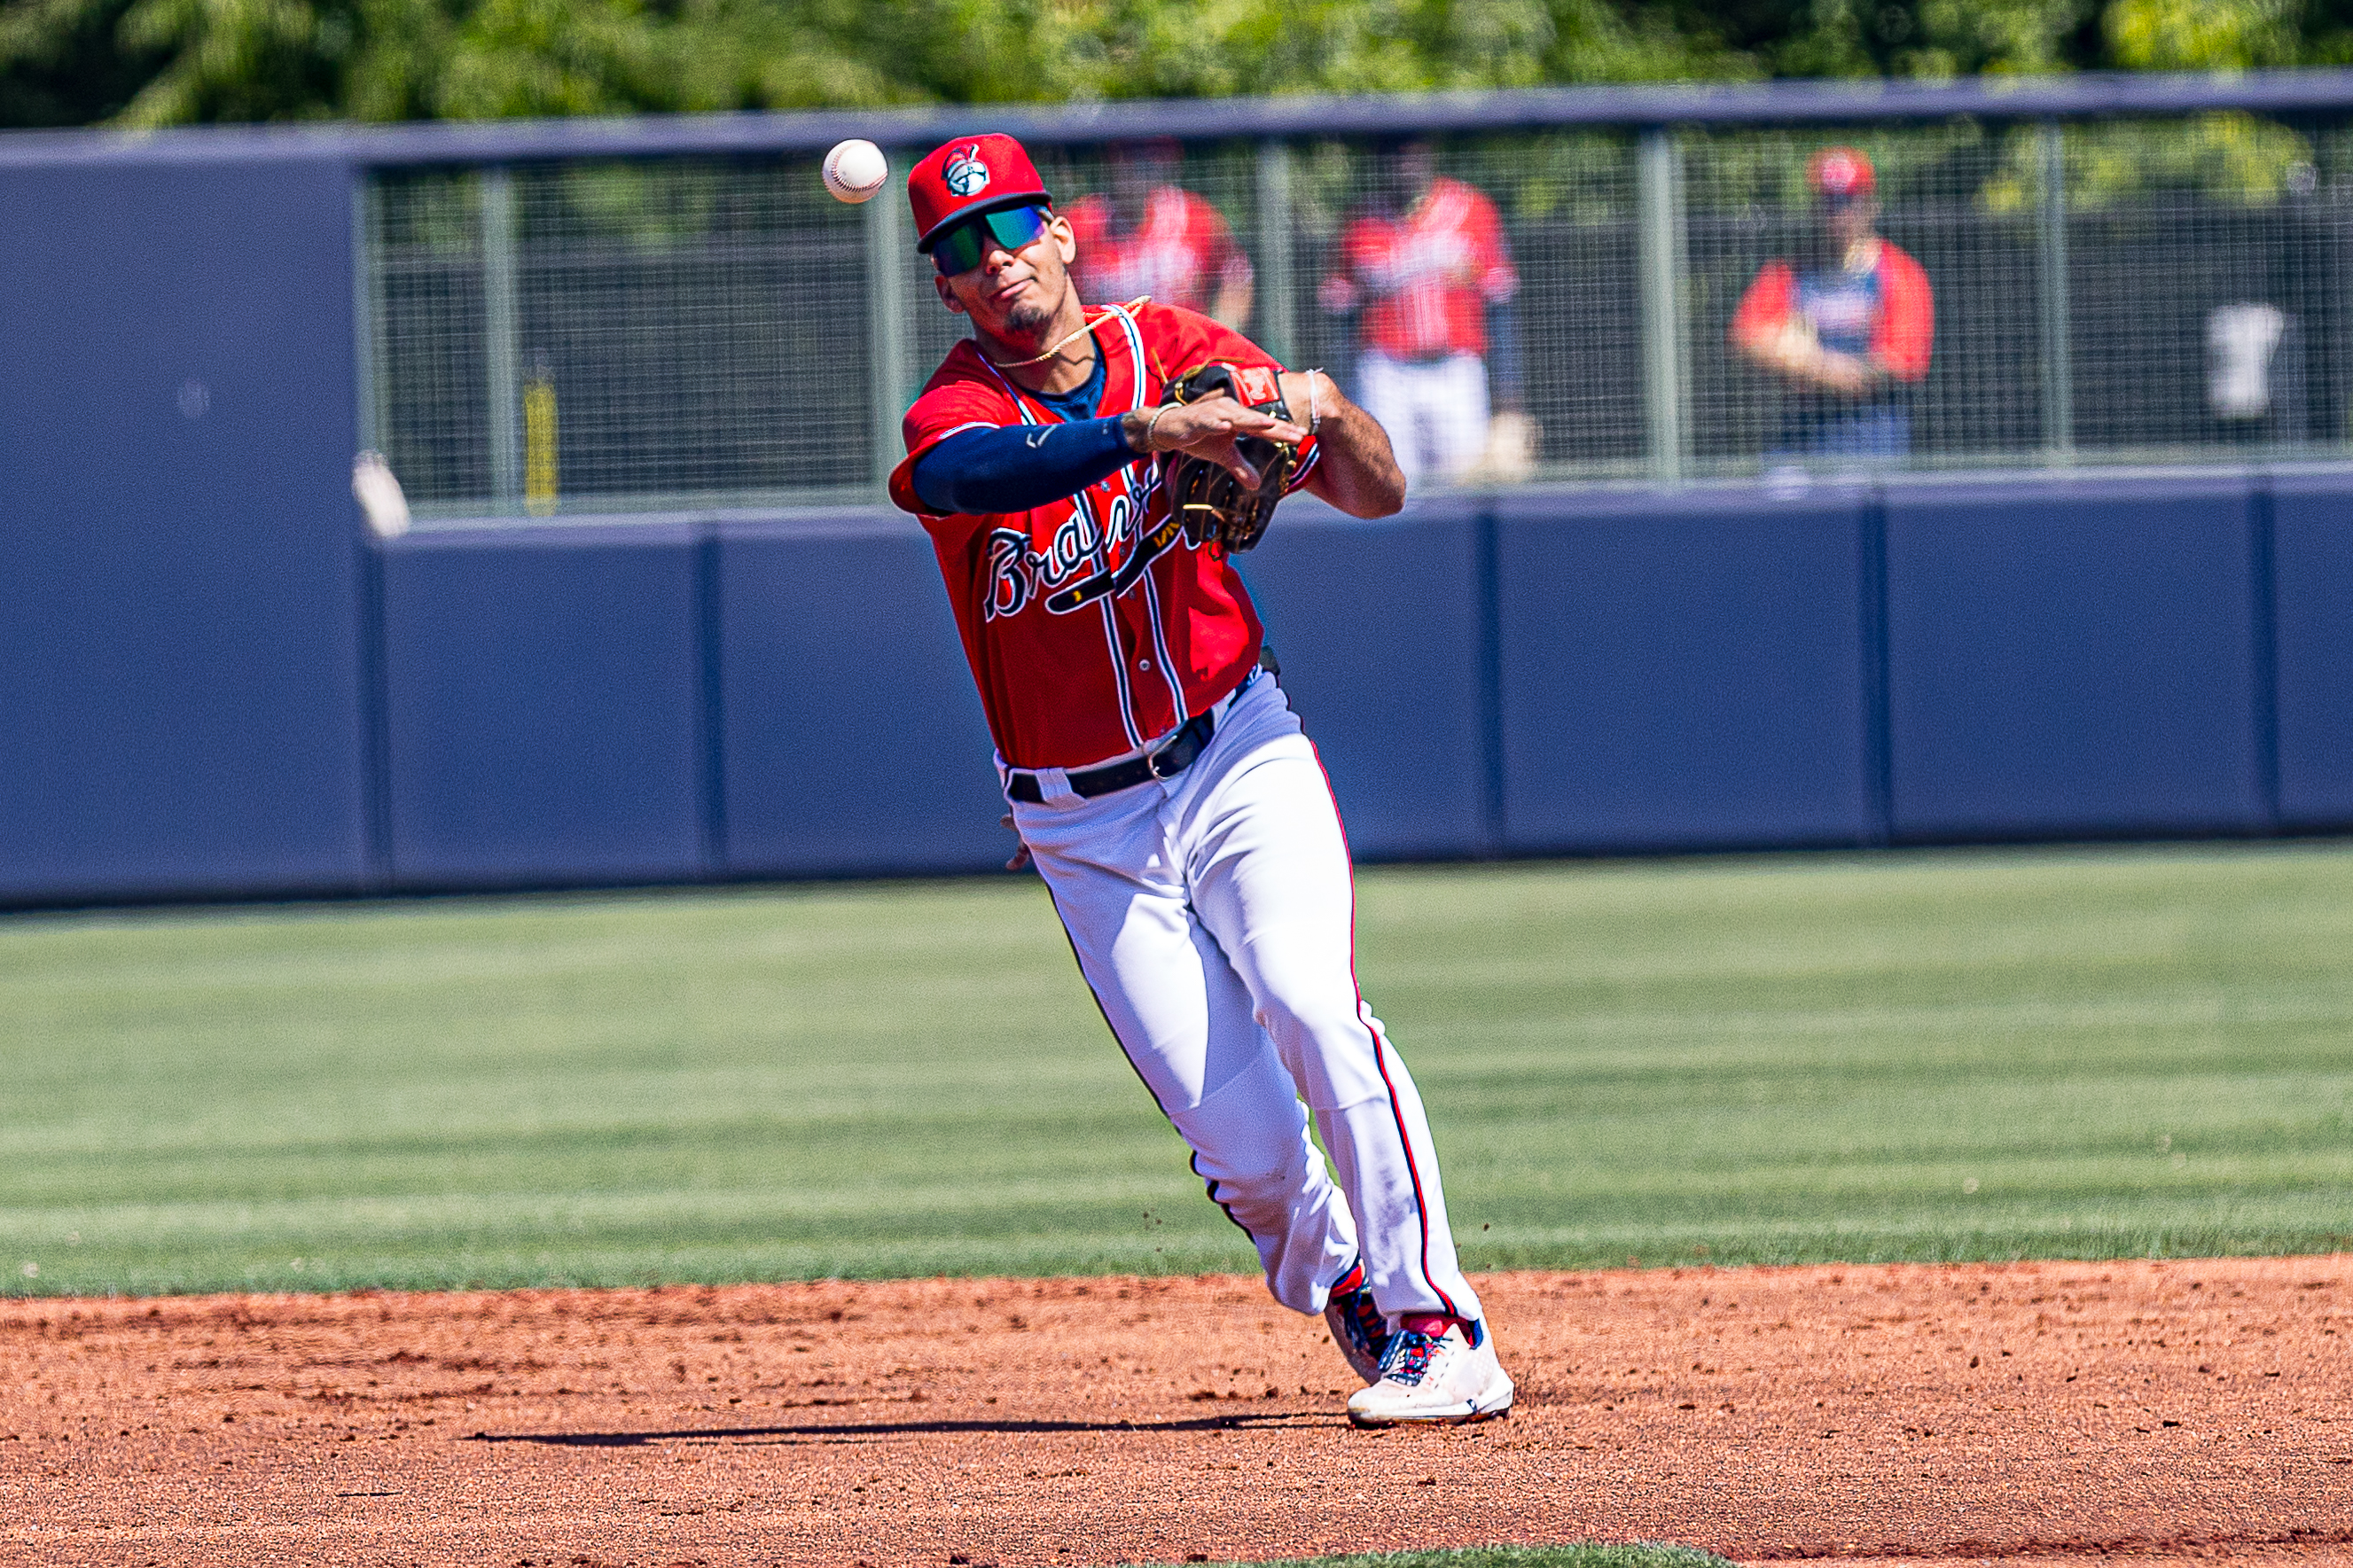 Vaughn Grissom makes a throw for the Rome Braves